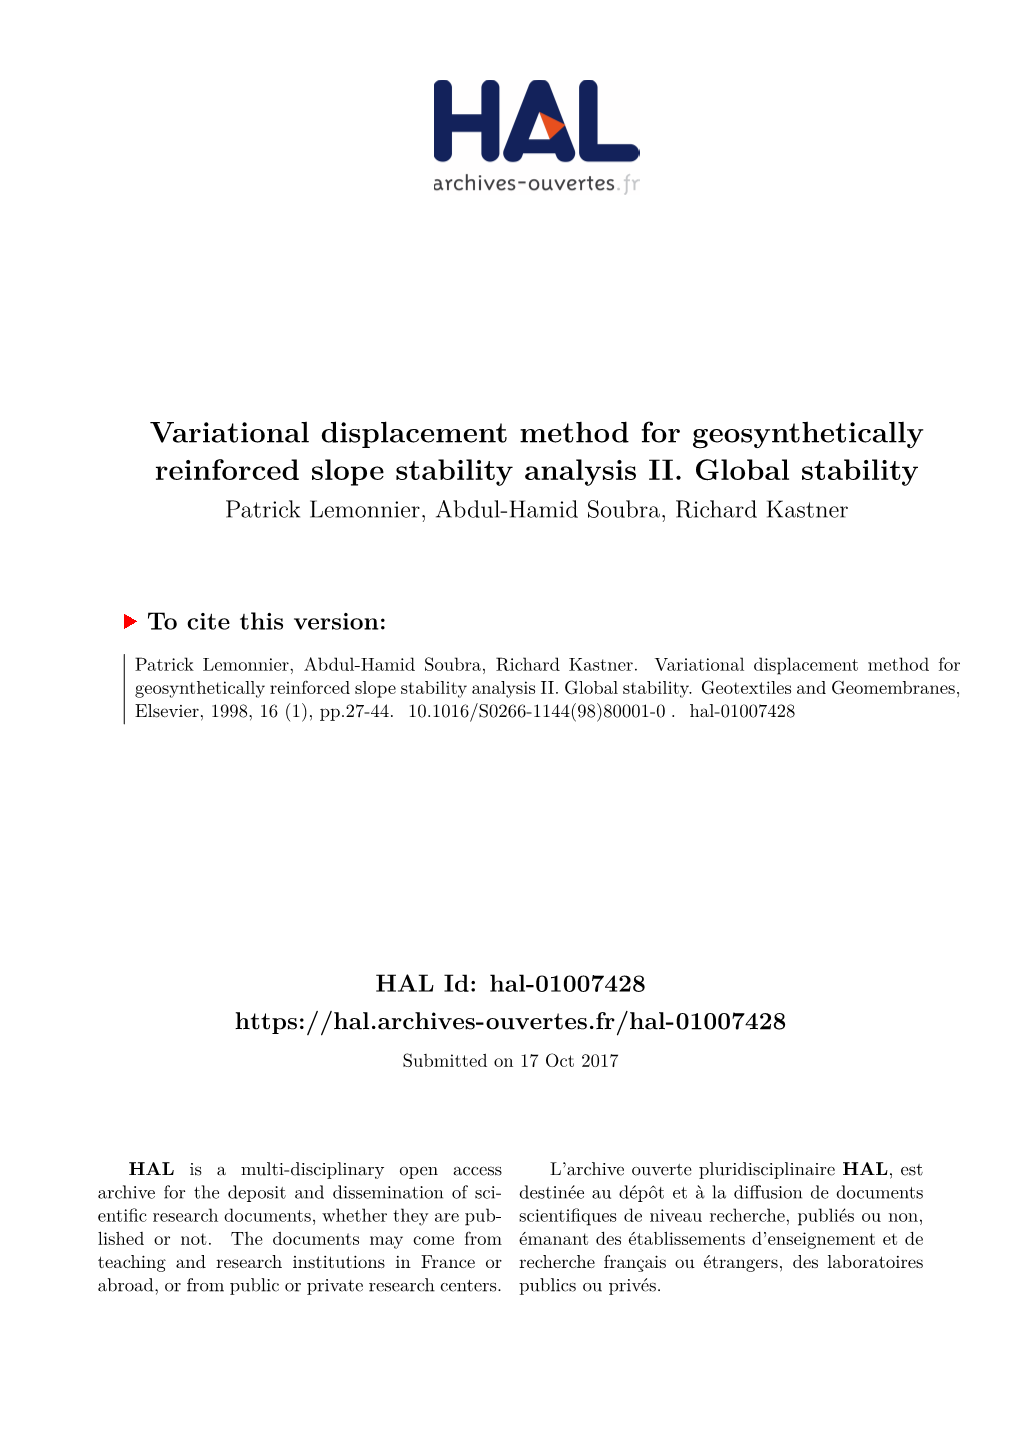 Variational Displacement Method for Geosynthetically Reinforced Slope Stability Analysis II